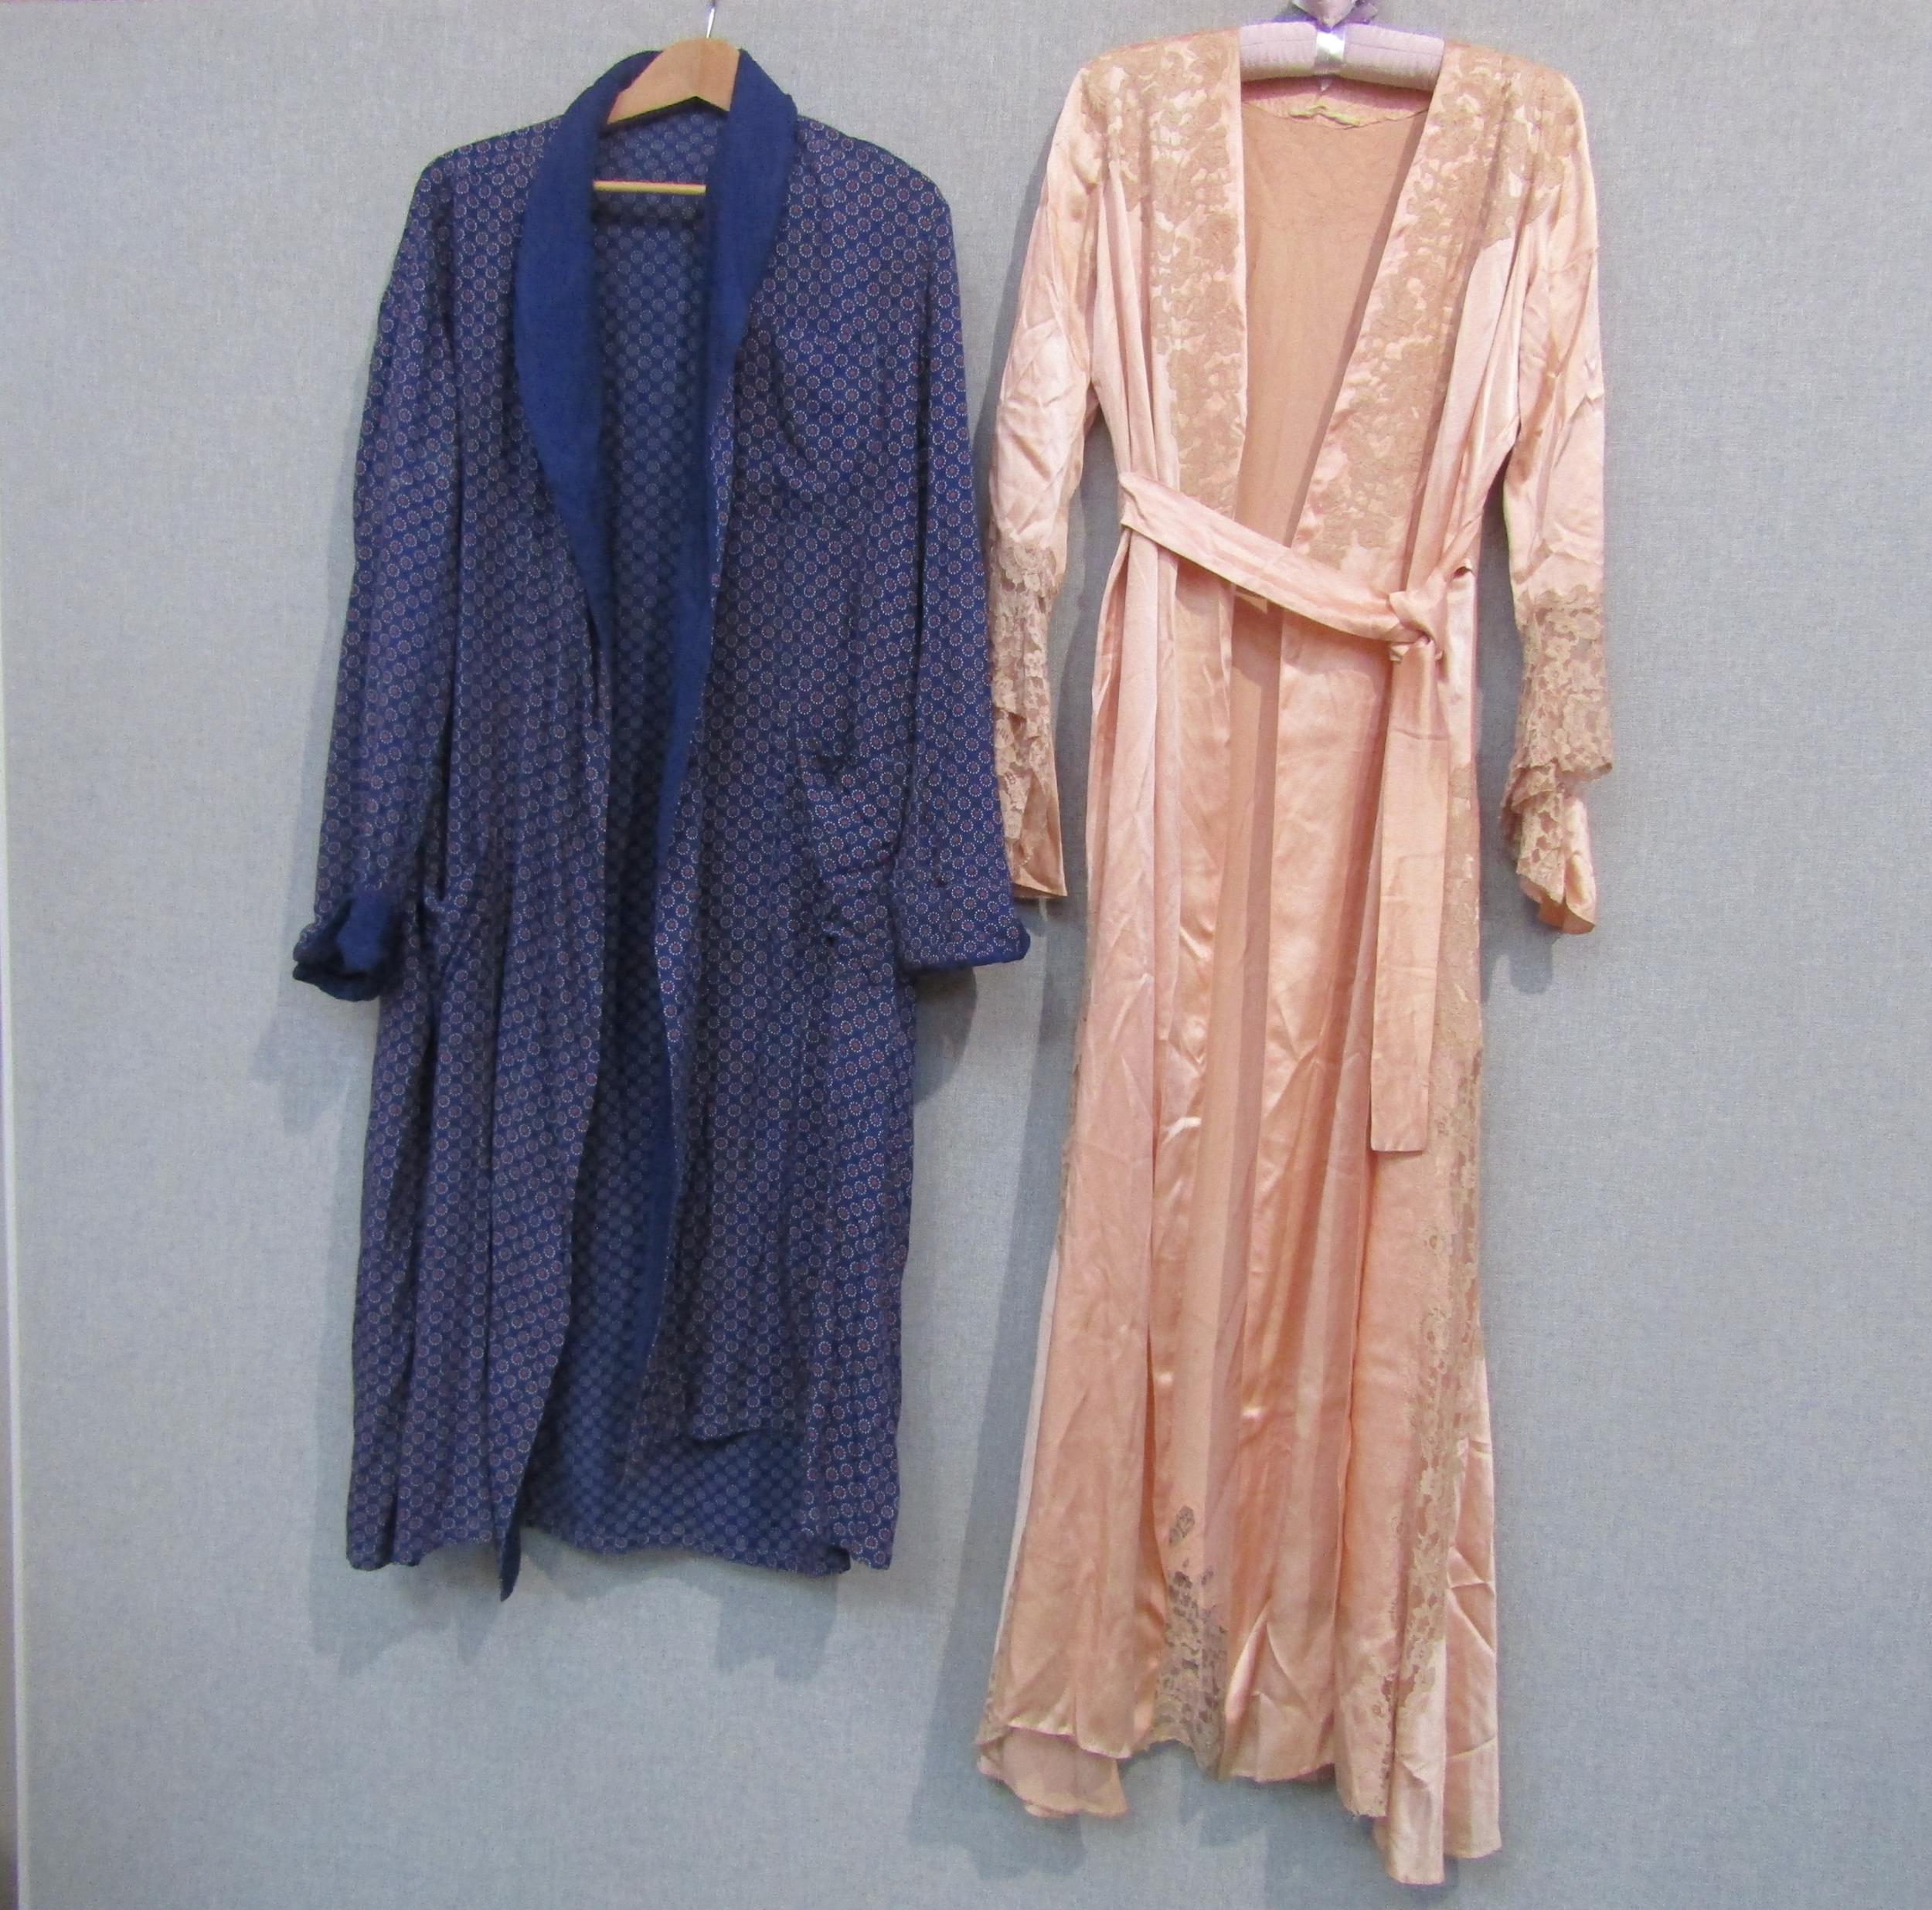 A 1930's/40's peach silk dressing gown with toning lace detail, a/f in some areas to the lace, and a